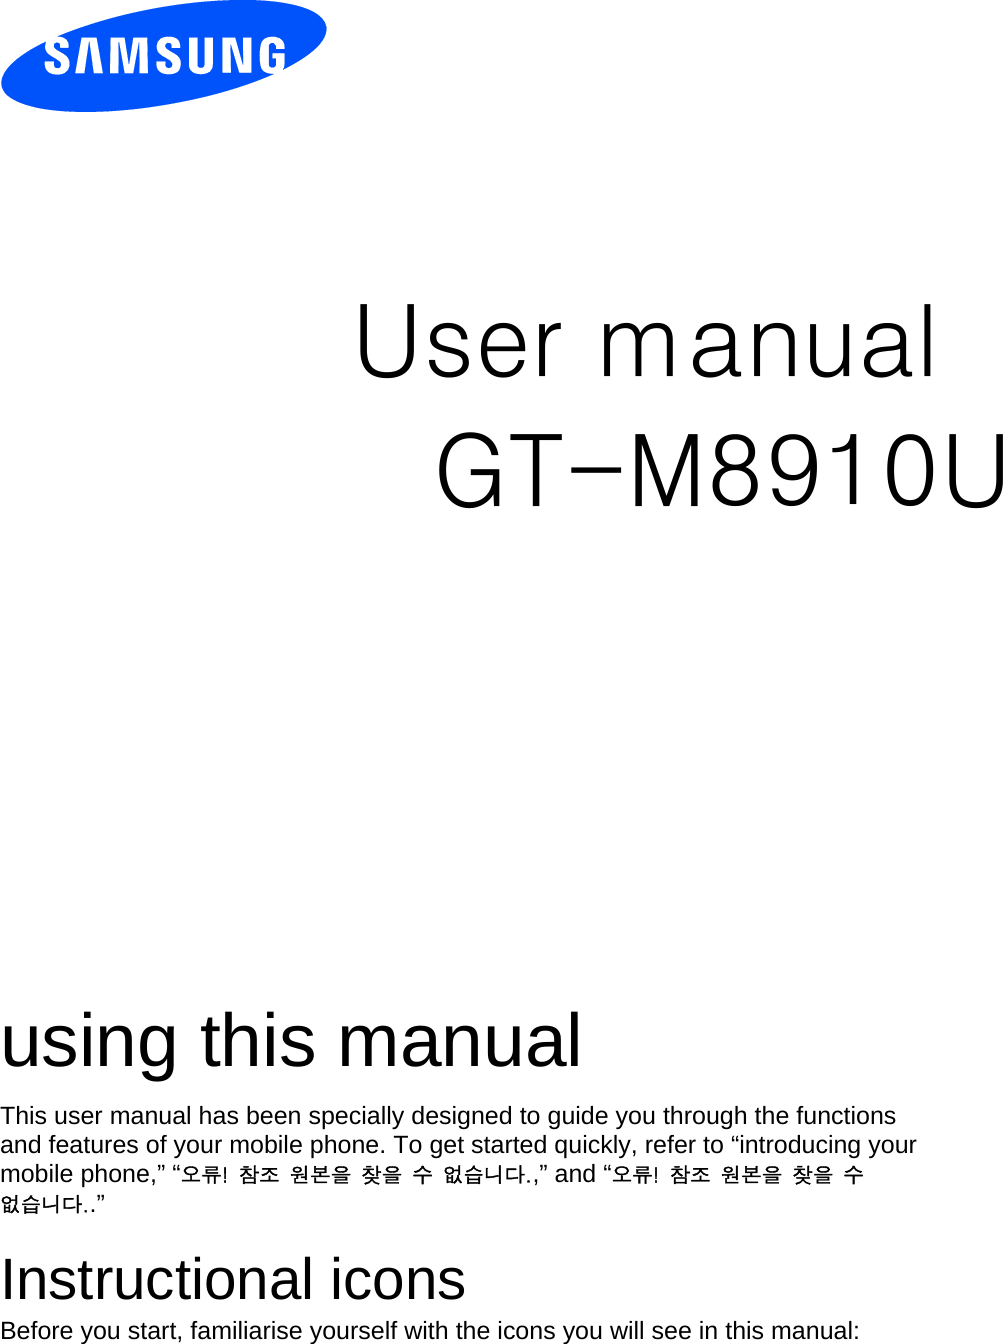          User manual GT-M8910U                  using this manual This user manual has been specially designed to guide you through the functions and features of your mobile phone. To get started quickly, refer to “introducing your mobile phone,” “오류!  참조  원본을  찾을  수  없습니다.,” and “오류!  참조  원본을  찾을  수 없습니다..”  Instructional icons Before you start, familiarise yourself with the icons you will see in this manual:   